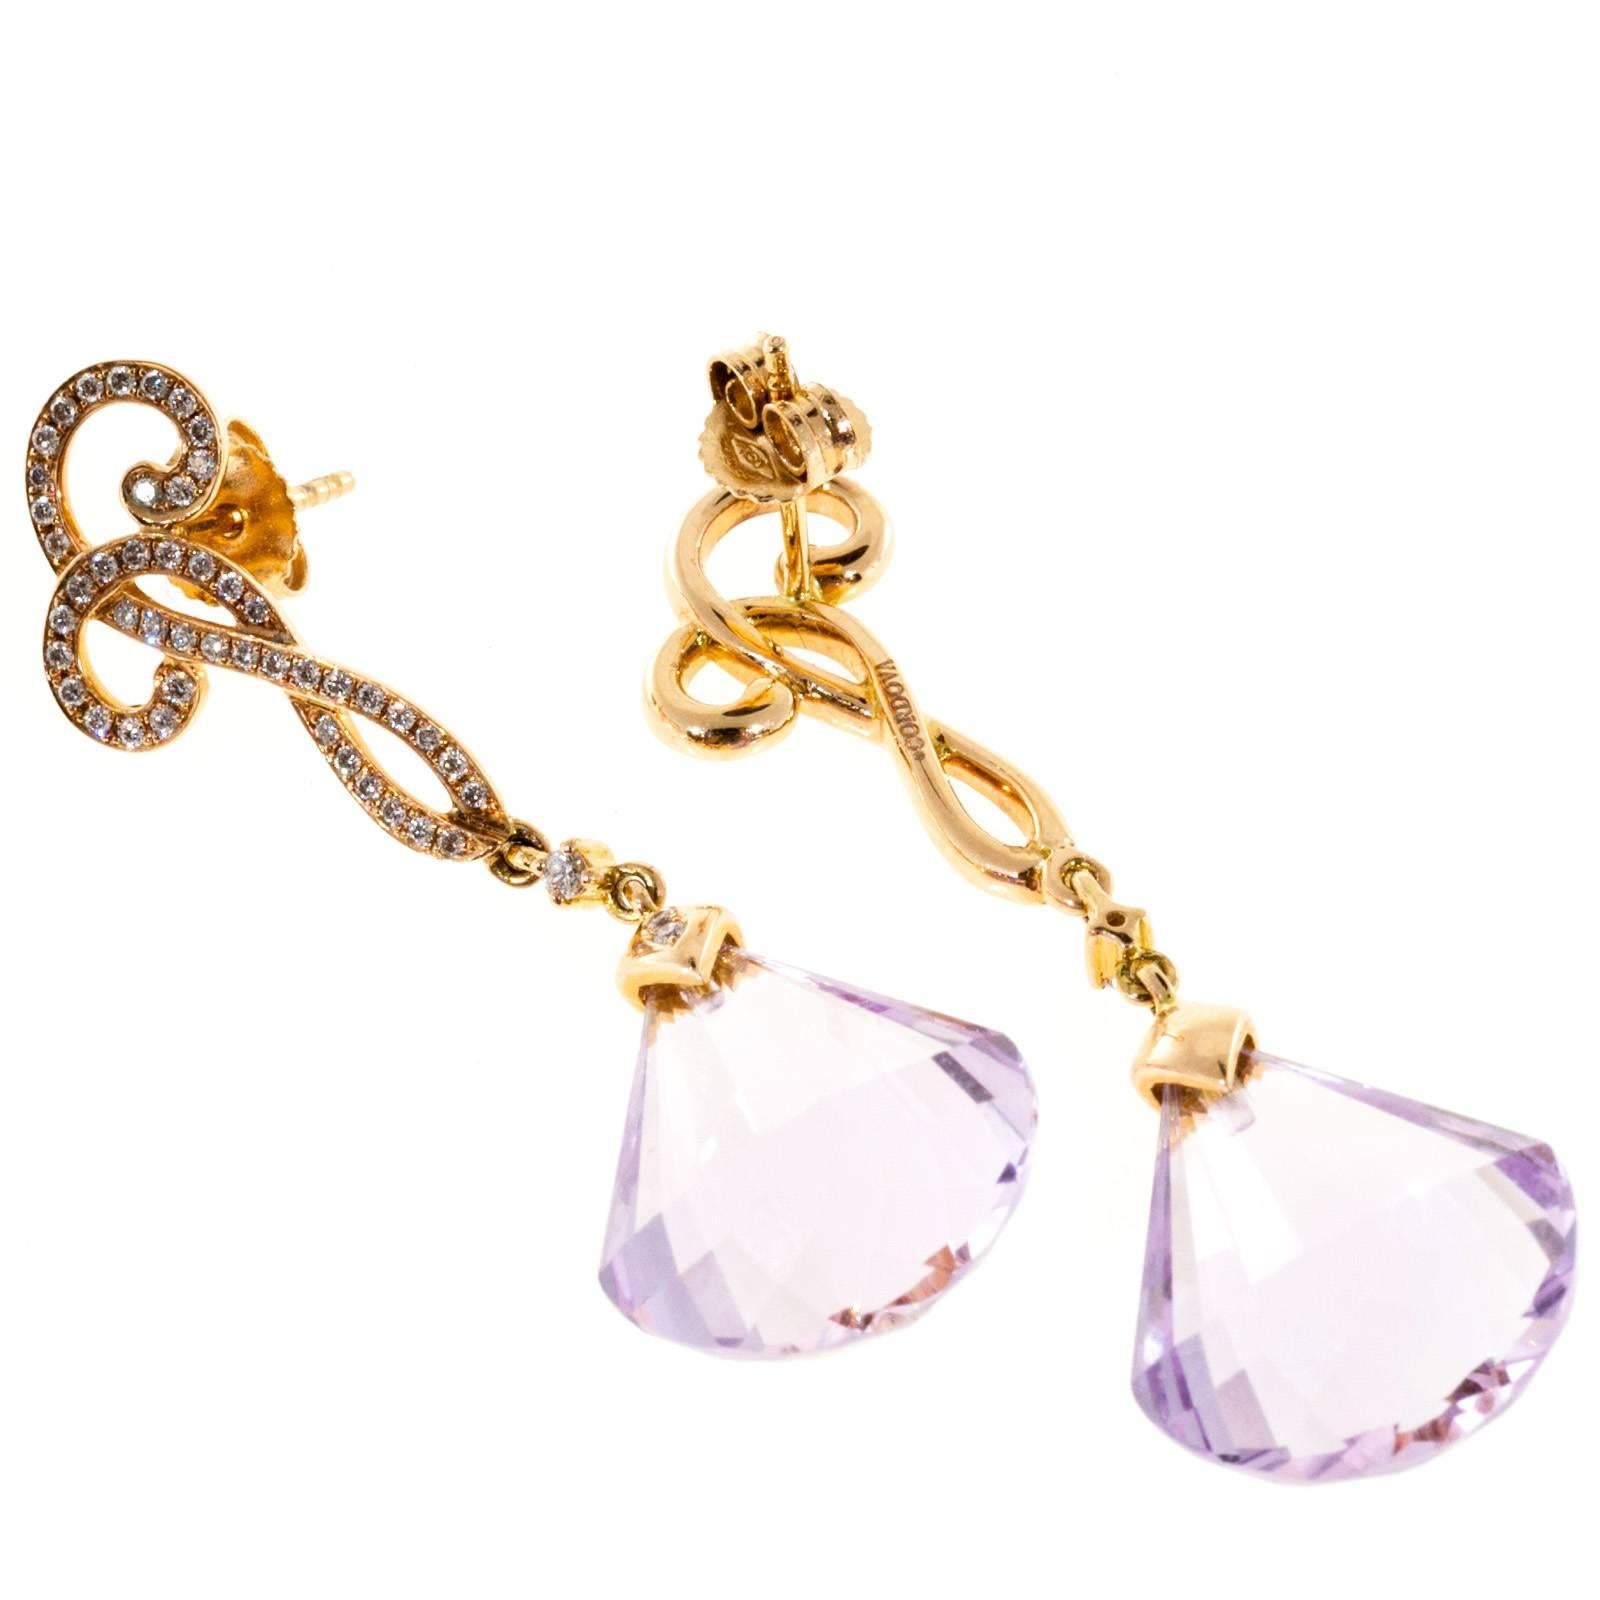 Cordova 14k rose gold diamond dangle earrings with custom cut Rose de France Amethyst .

2 custom cut fancy Rose de France Amethyst, 19.00 x 13.82 x 7.95 mm
98 round diamonds, approx. total weight.33cts
18k rose gold
Tested and stamped: